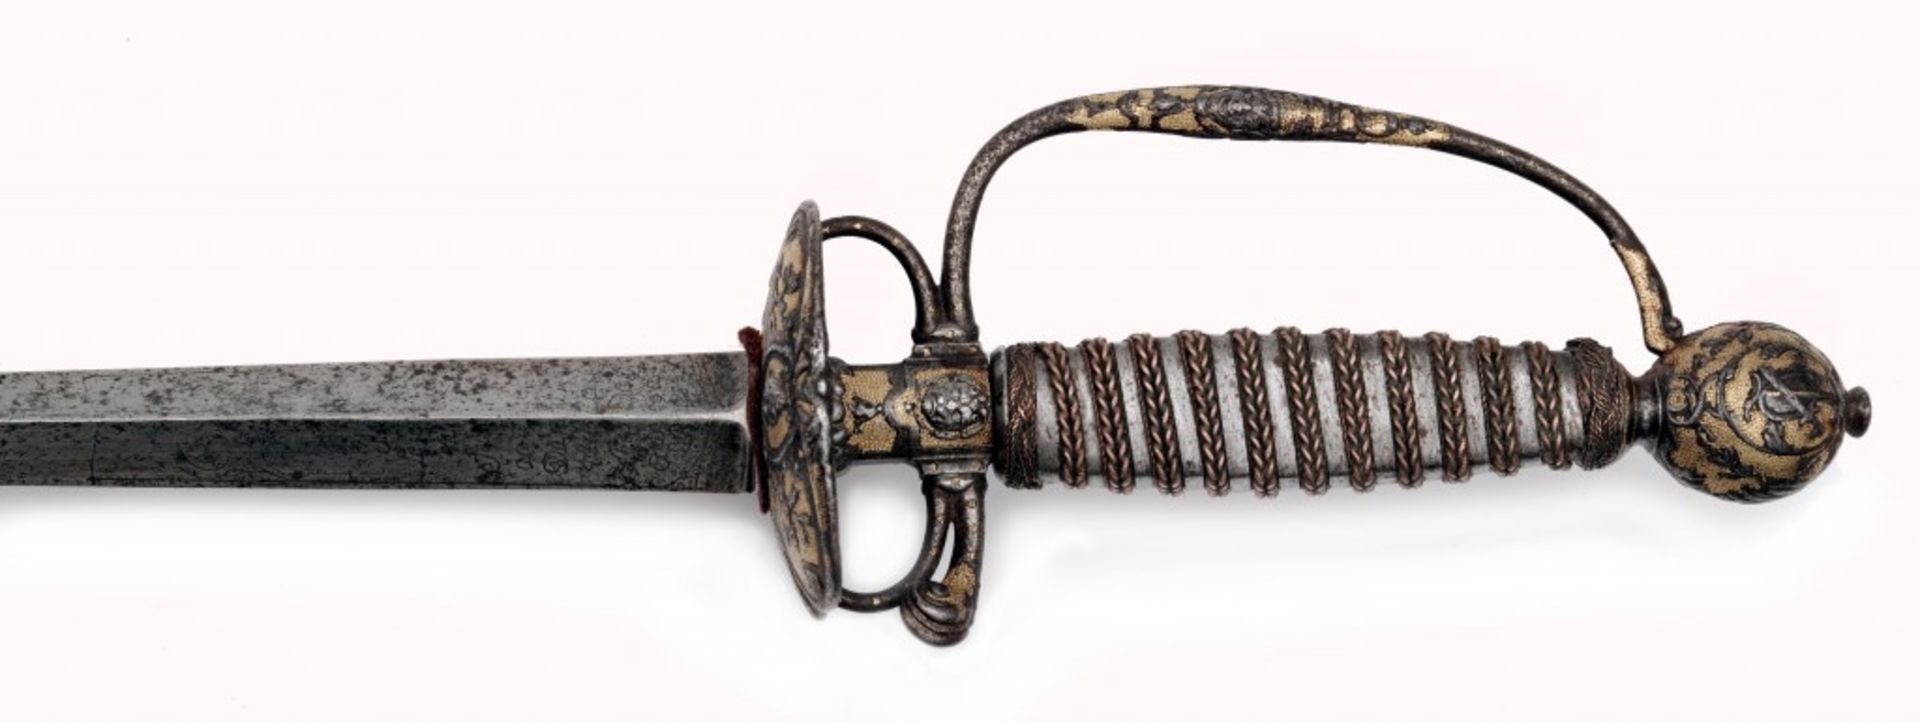 A French Gilt Small-sword with Chiselled Hilt by Jean Louis Guyon the Elder